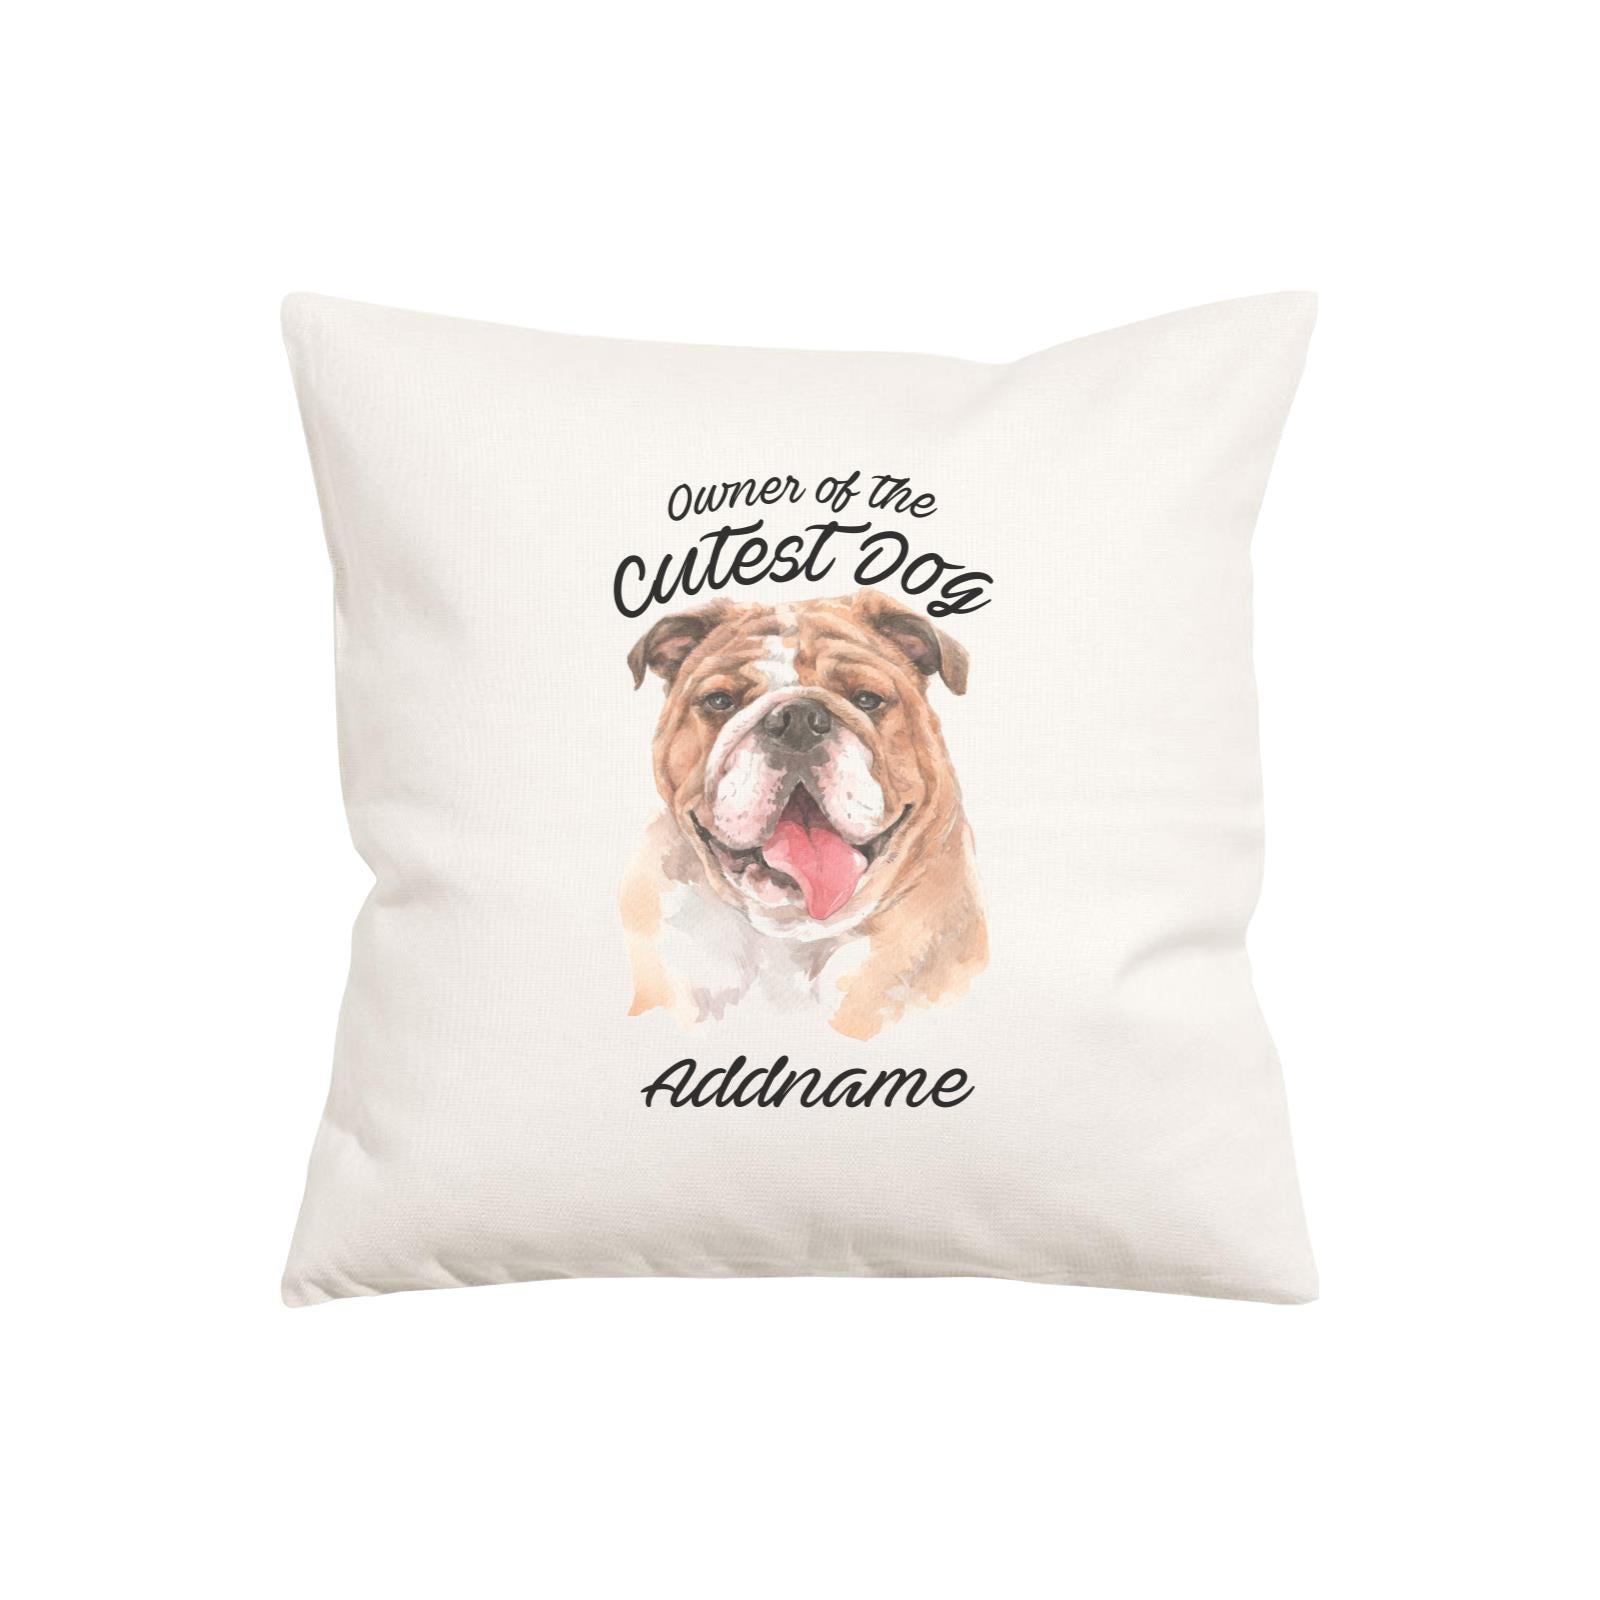 Watercolor Dog Owner Of The Cutest Dog Bulldog Addname Pillow Cushion